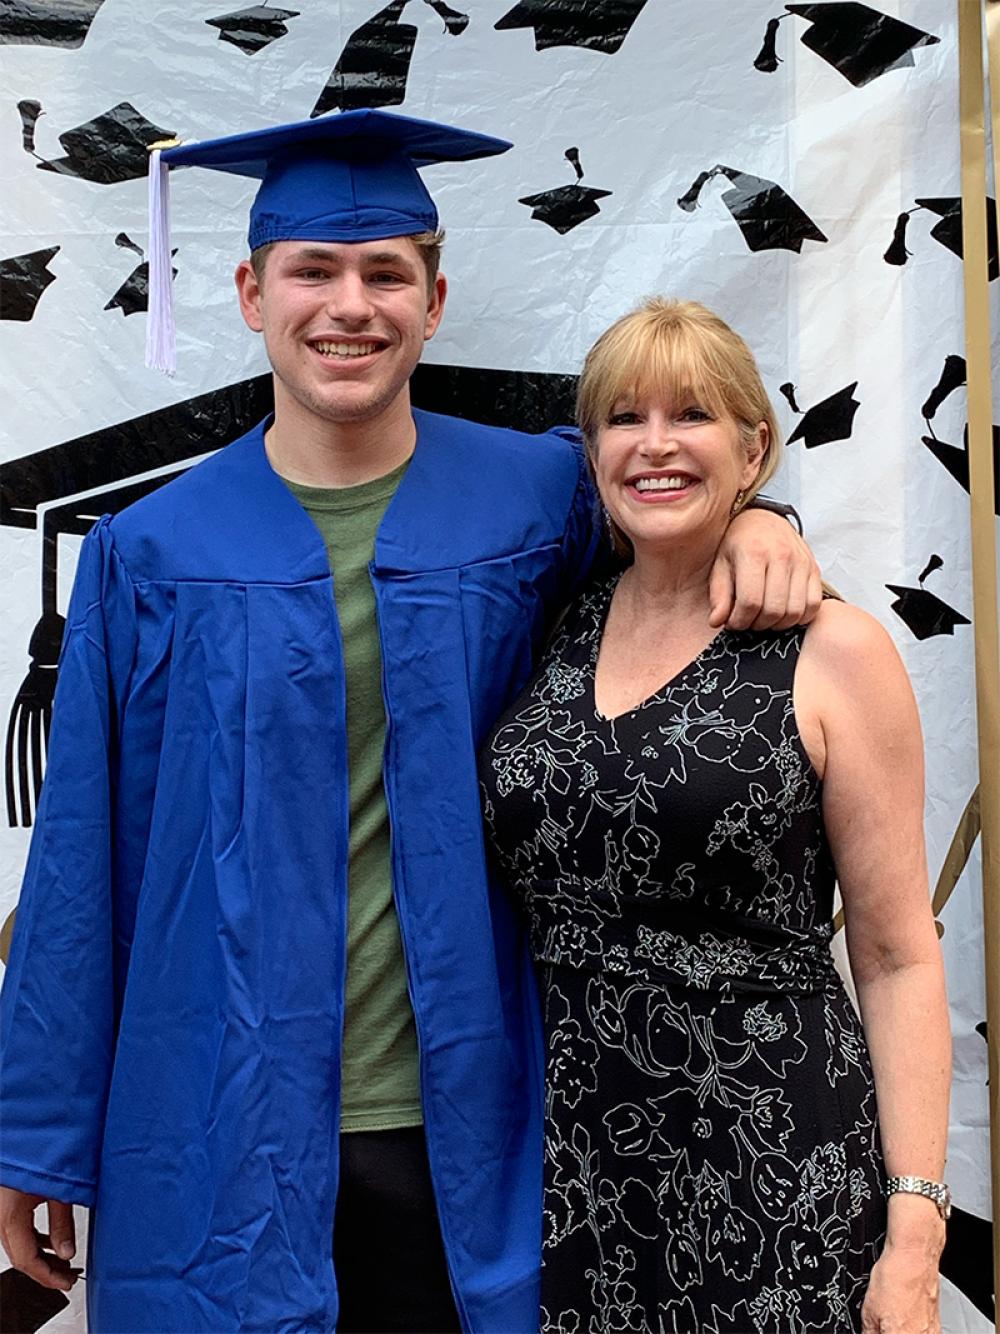 Katherine stands next to her son, who is wearing a graduation cap and gown and has his arm around her shoulders, both smiling